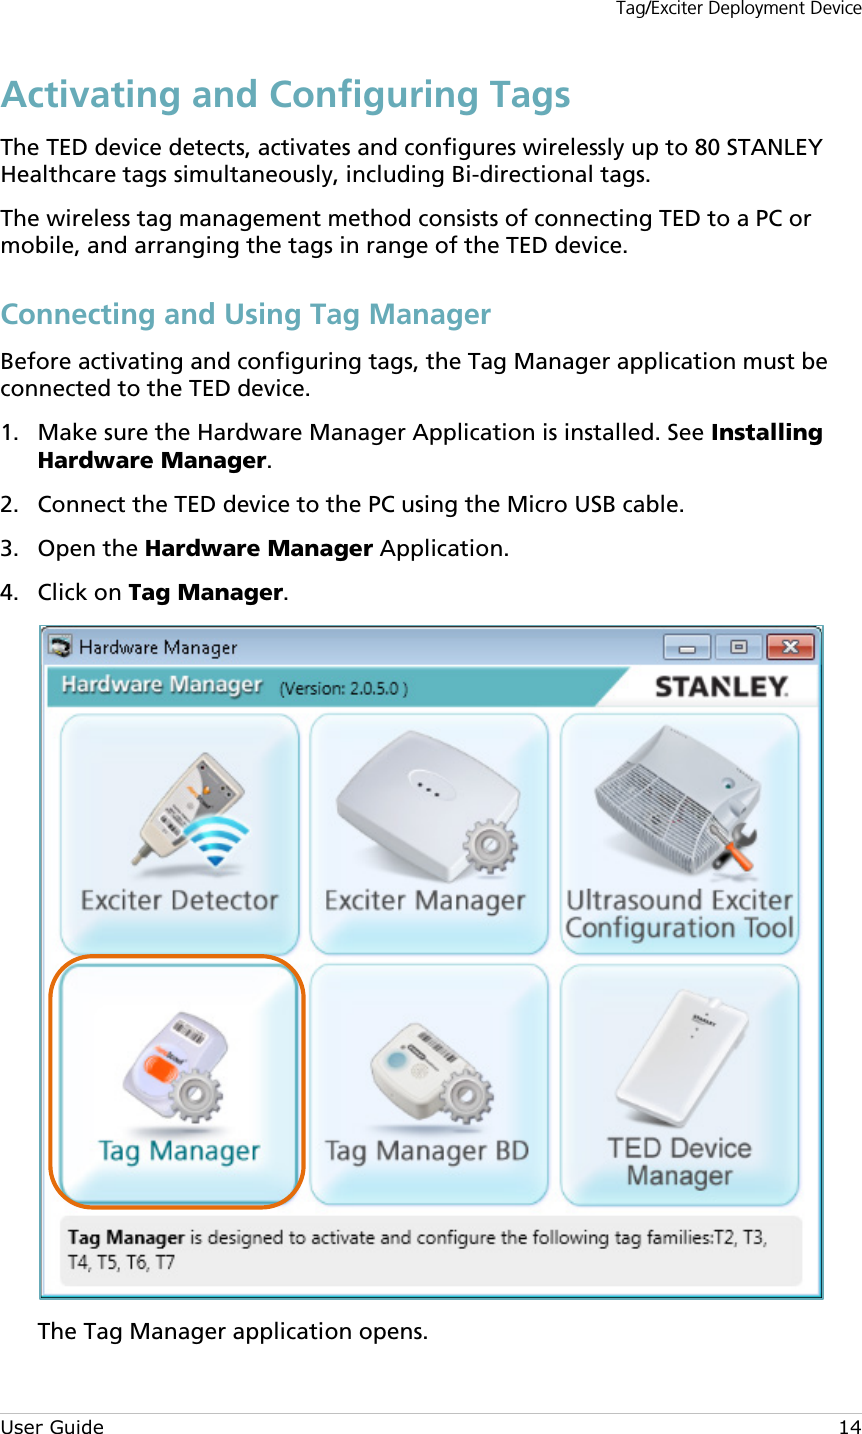 Tag/Exciter Deployment Device User Guide 14 Activating and Configuring Tags The TED device detects, activates and configures wirelessly up to 80 STANLEY Healthcare tags simultaneously, including Bi-directional tags.  The wireless tag management method consists of connecting TED to a PC or mobile, and arranging the tags in range of the TED device. Connecting and Using Tag Manager Before activating and configuring tags, the Tag Manager application must be connected to the TED device.  Make sure the Hardware Manager Application is installed. See Installing 1.Hardware Manager.  Connect the TED device to the PC using the Micro USB cable. 2. Open the Hardware Manager Application. 3. Click on Tag Manager.  4. The Tag Manager application opens. 